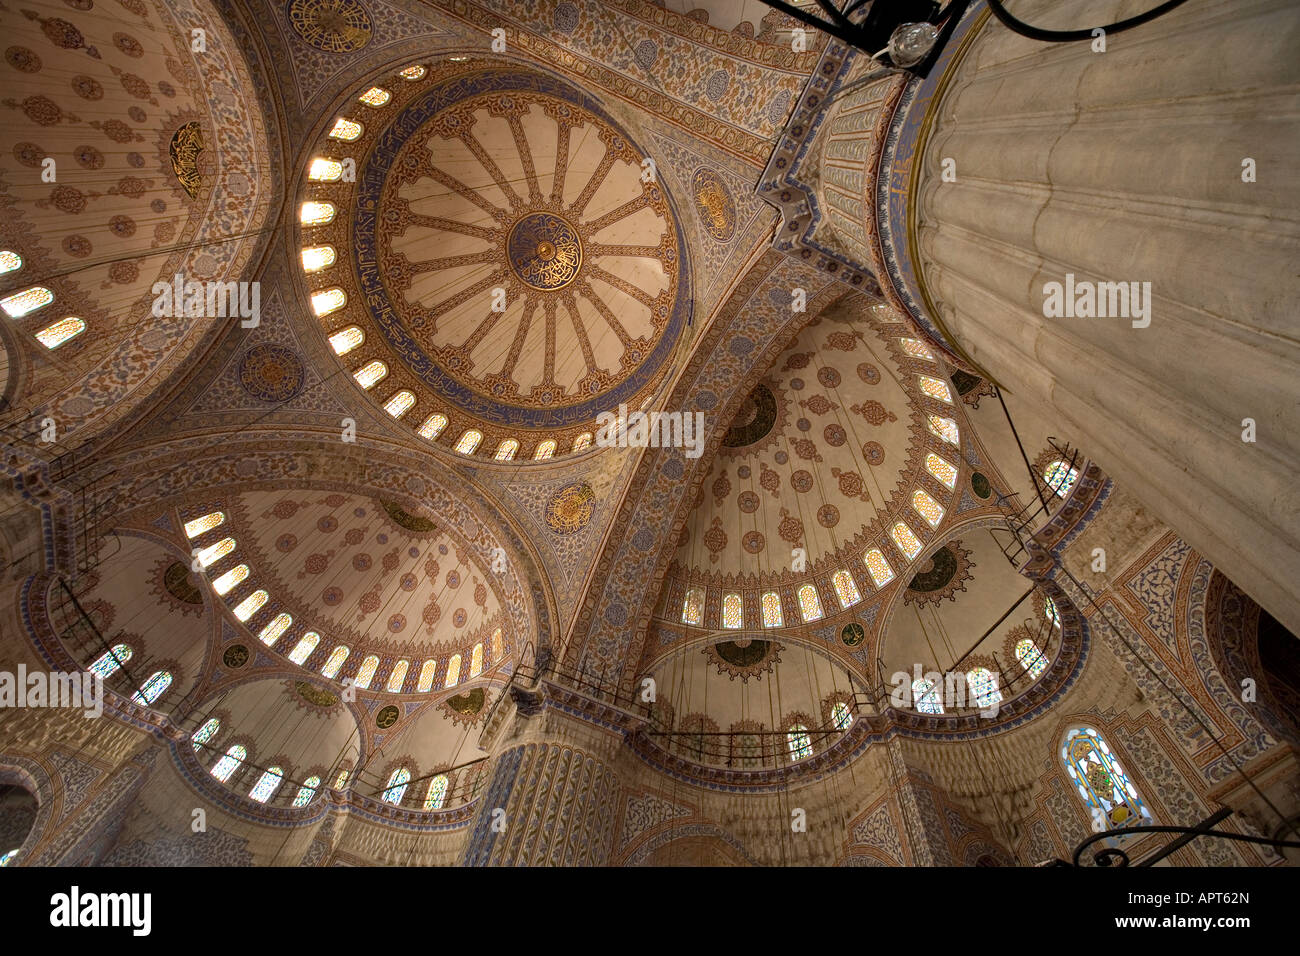 Interior roof detail of the Blue Mosque, Sultan Ahmed Mosque, Istanbul, Turkey Stock Photo